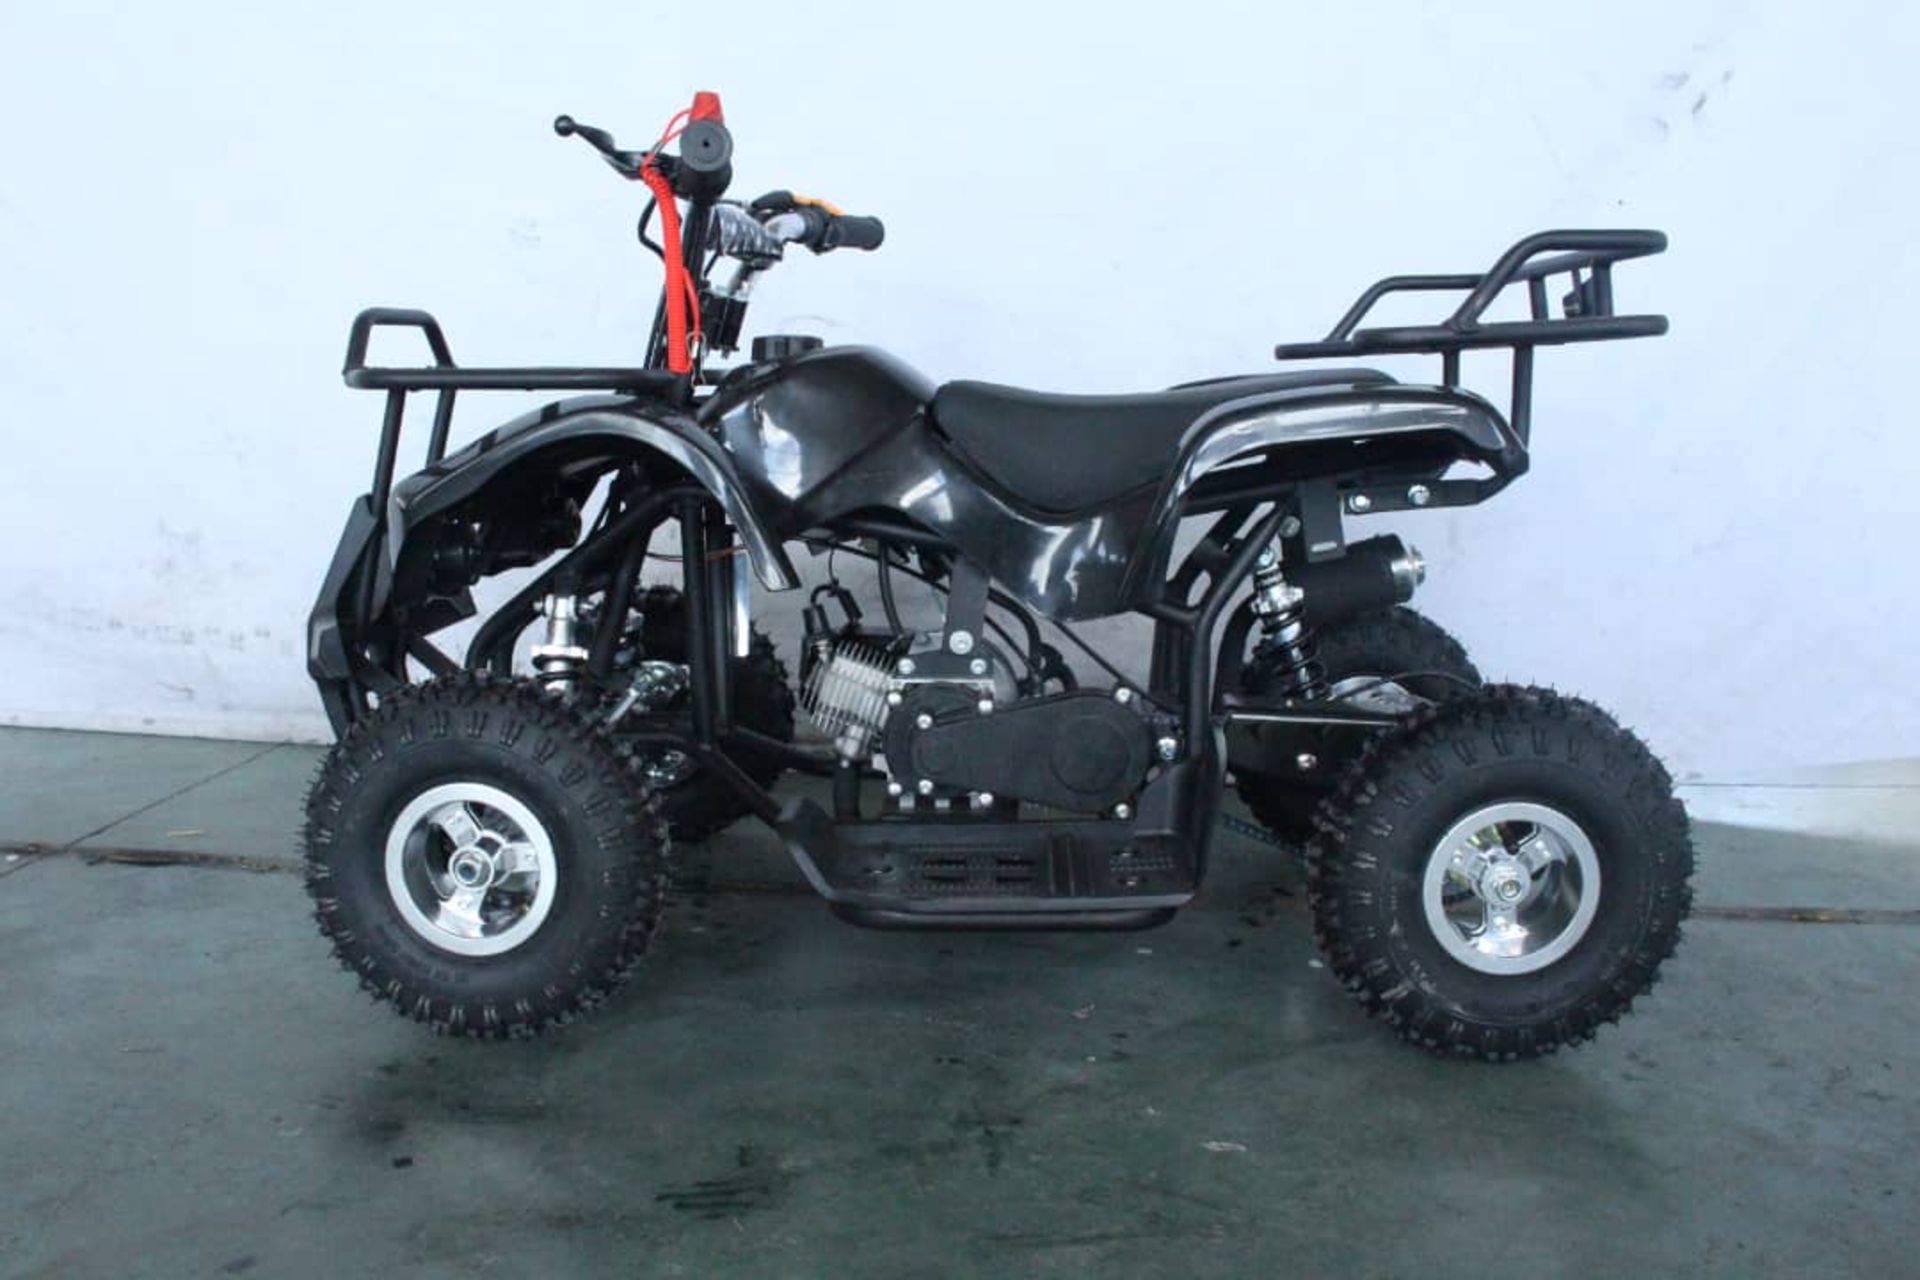 + VAT Brand New 50cc Mini Quad Bike FRM - Colours May Vary - Picture May Vary From Actual Item - Image 5 of 9